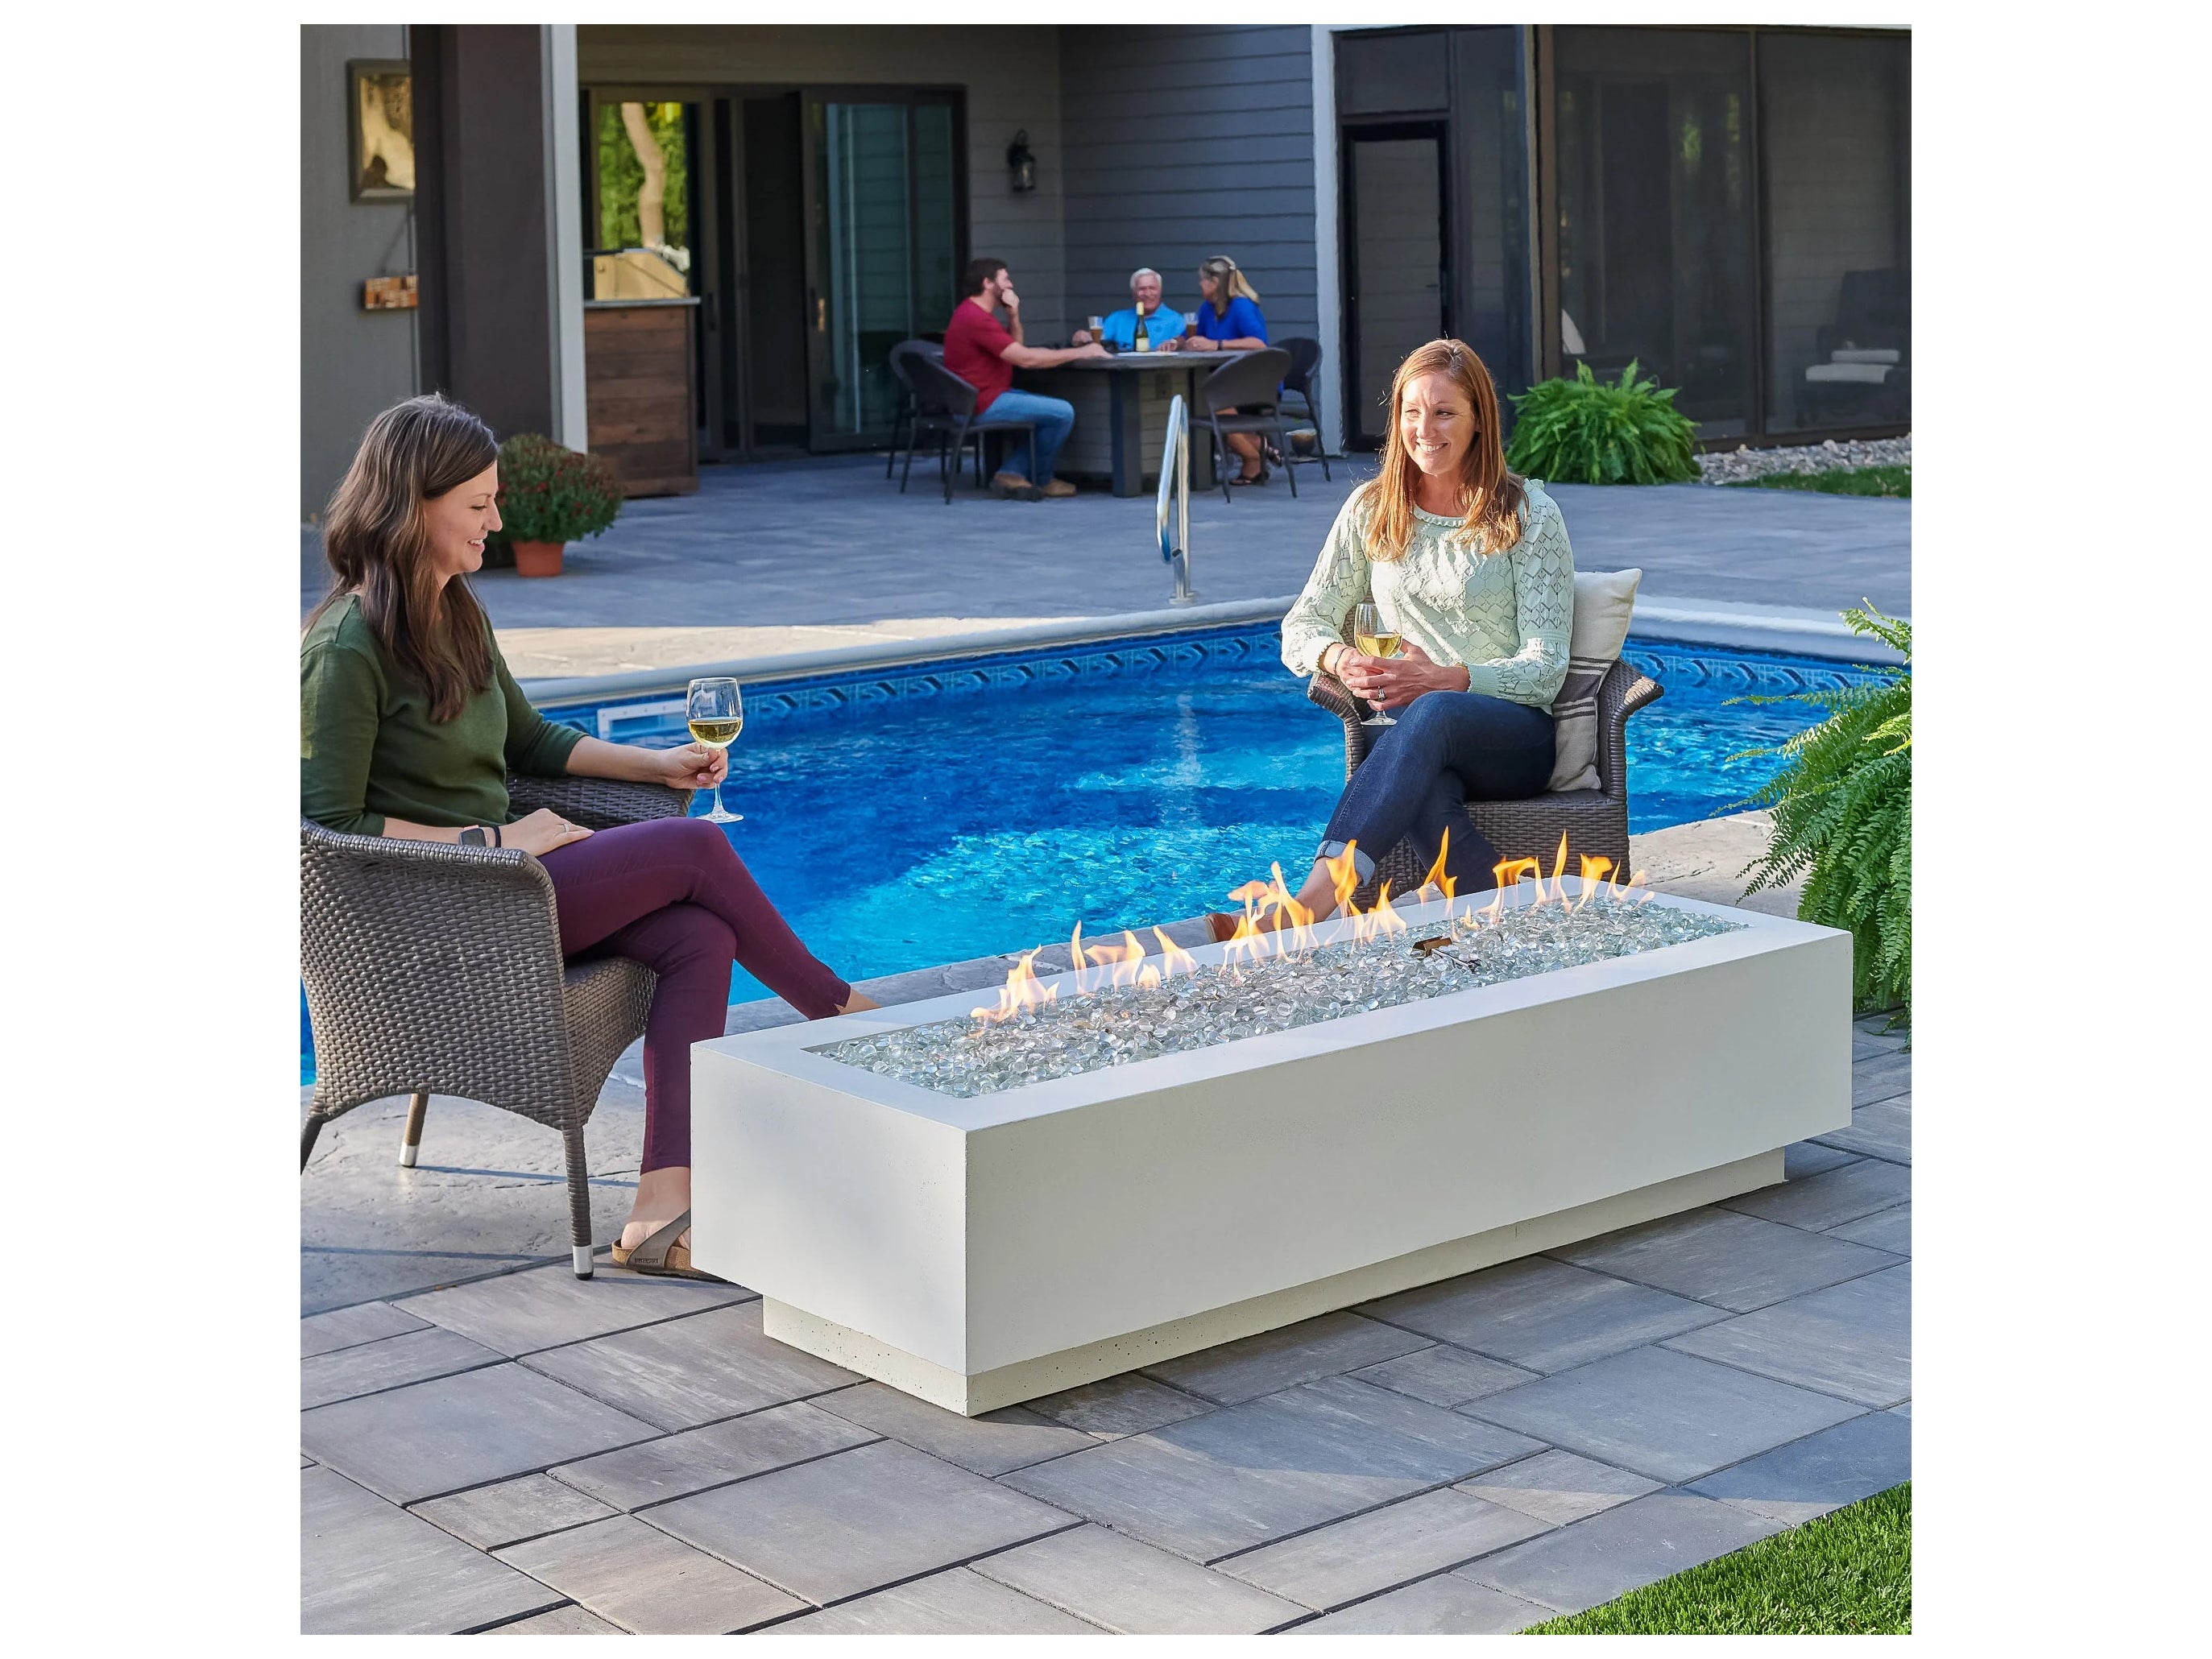 Outdoor Greatroom - 72’‘W/24’'D - Cove Supercast Concrete White Rectangular Linear Gas Fire Pit Table - 465 lbs